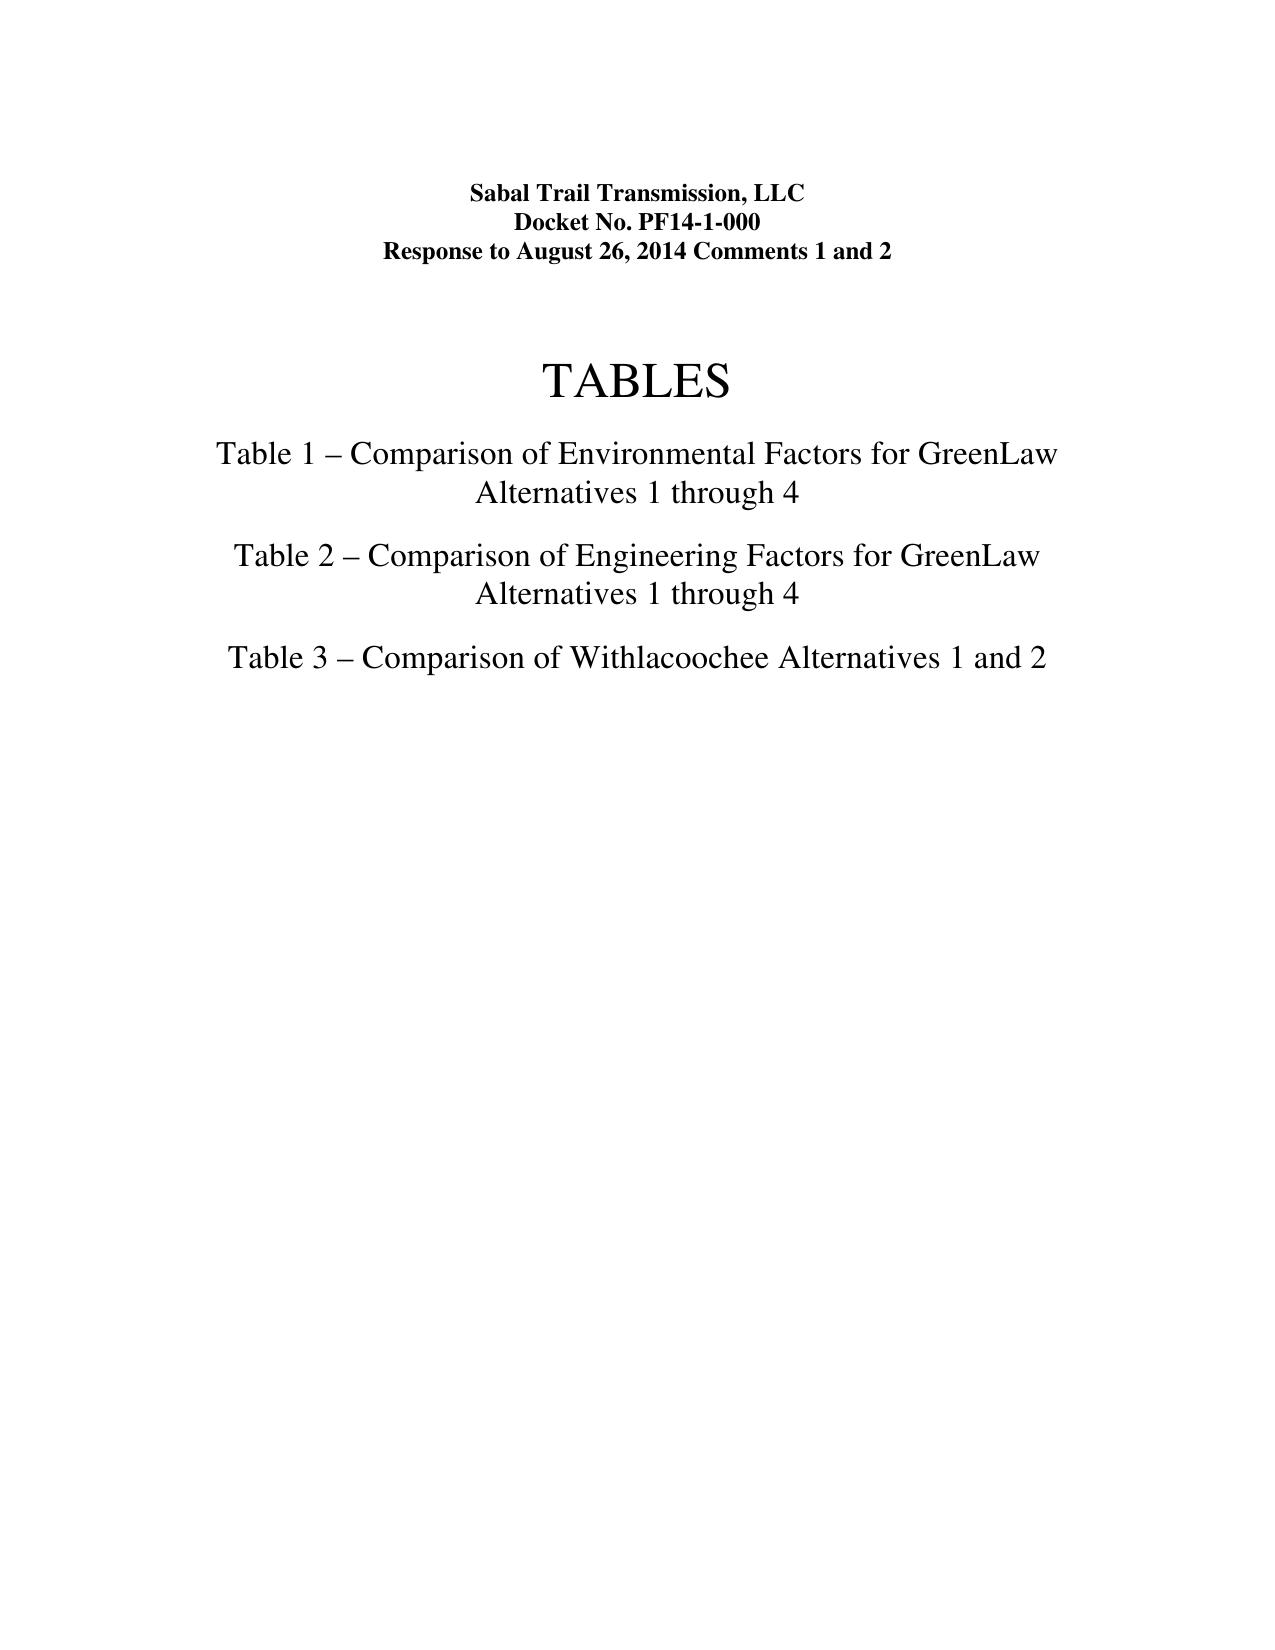 1275x1650 Table list, in Response to FERC directive of 26 August 2014, by Sabal Trail Transmission, for SpectraBusters.org, 15 September 2014